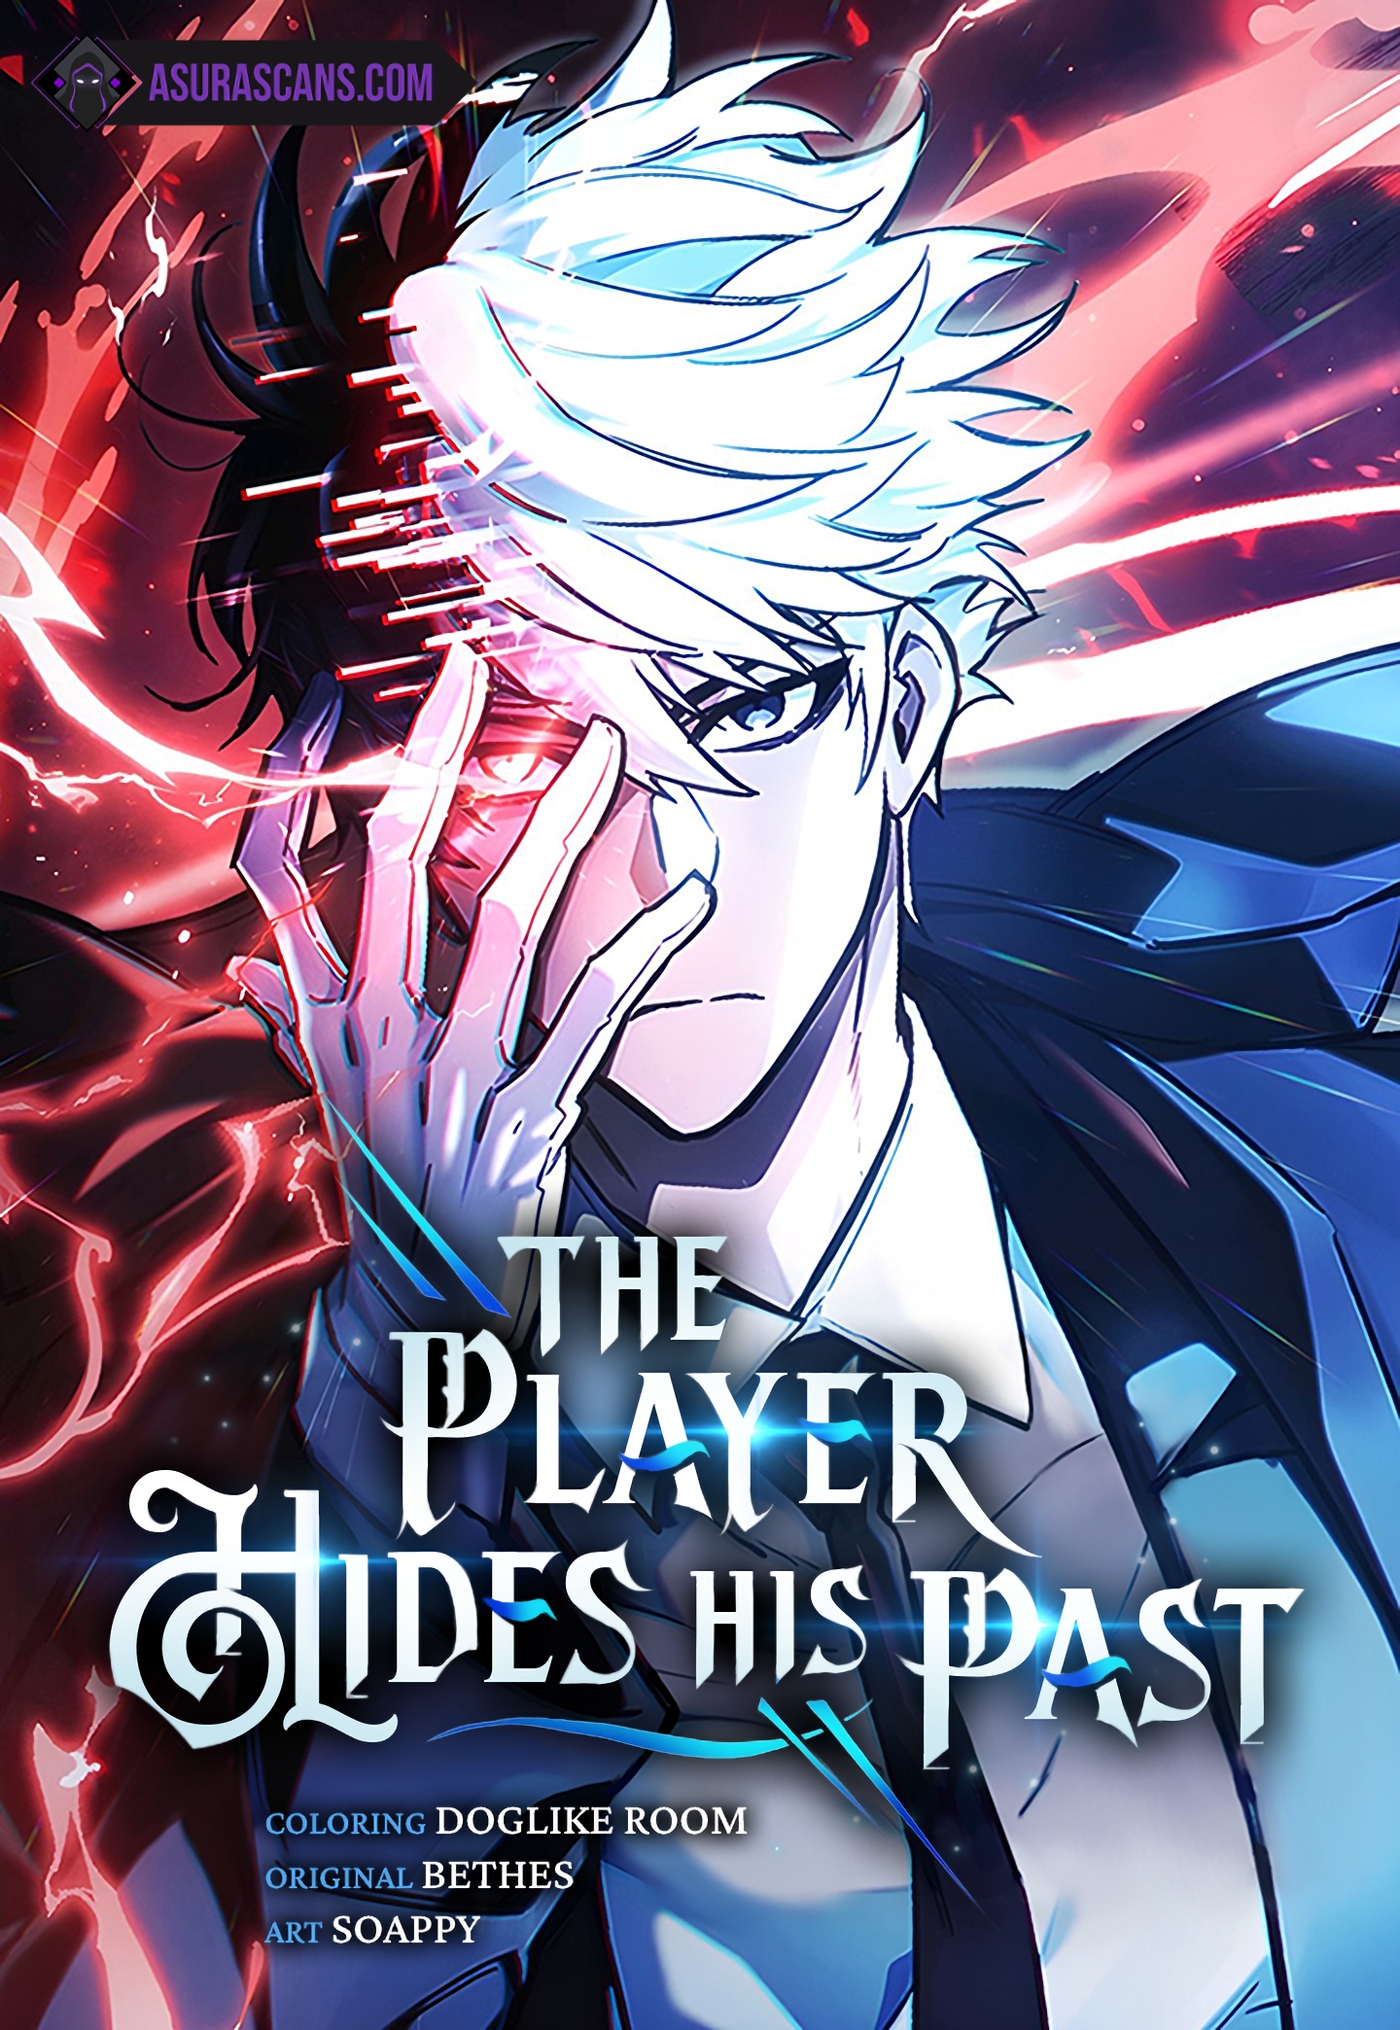 The Player Hides His Past manhwa